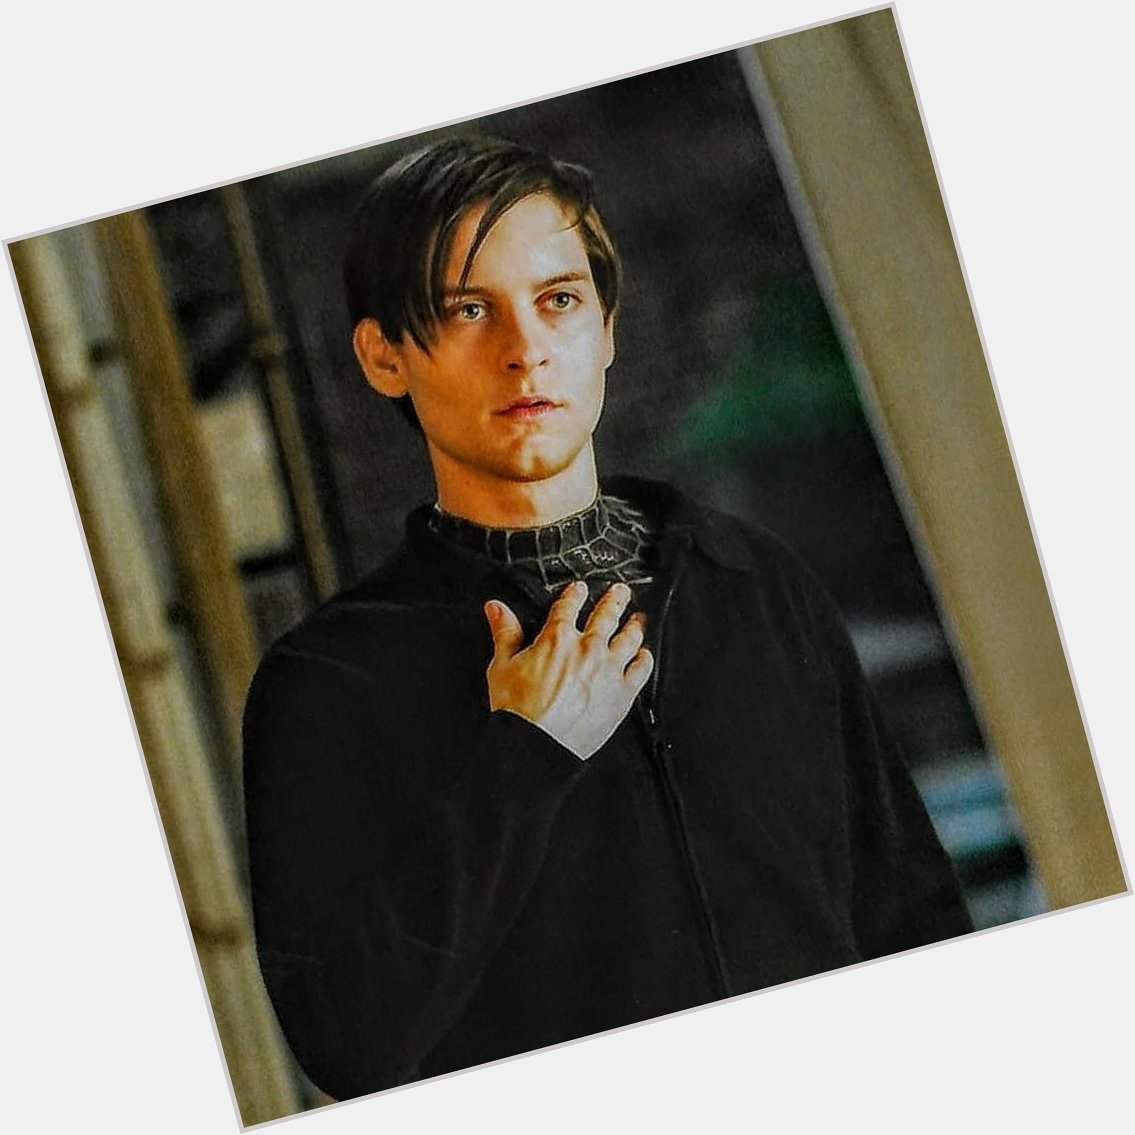 Happy Birthday to my Childhood Goat, love you Tobey Maguire 